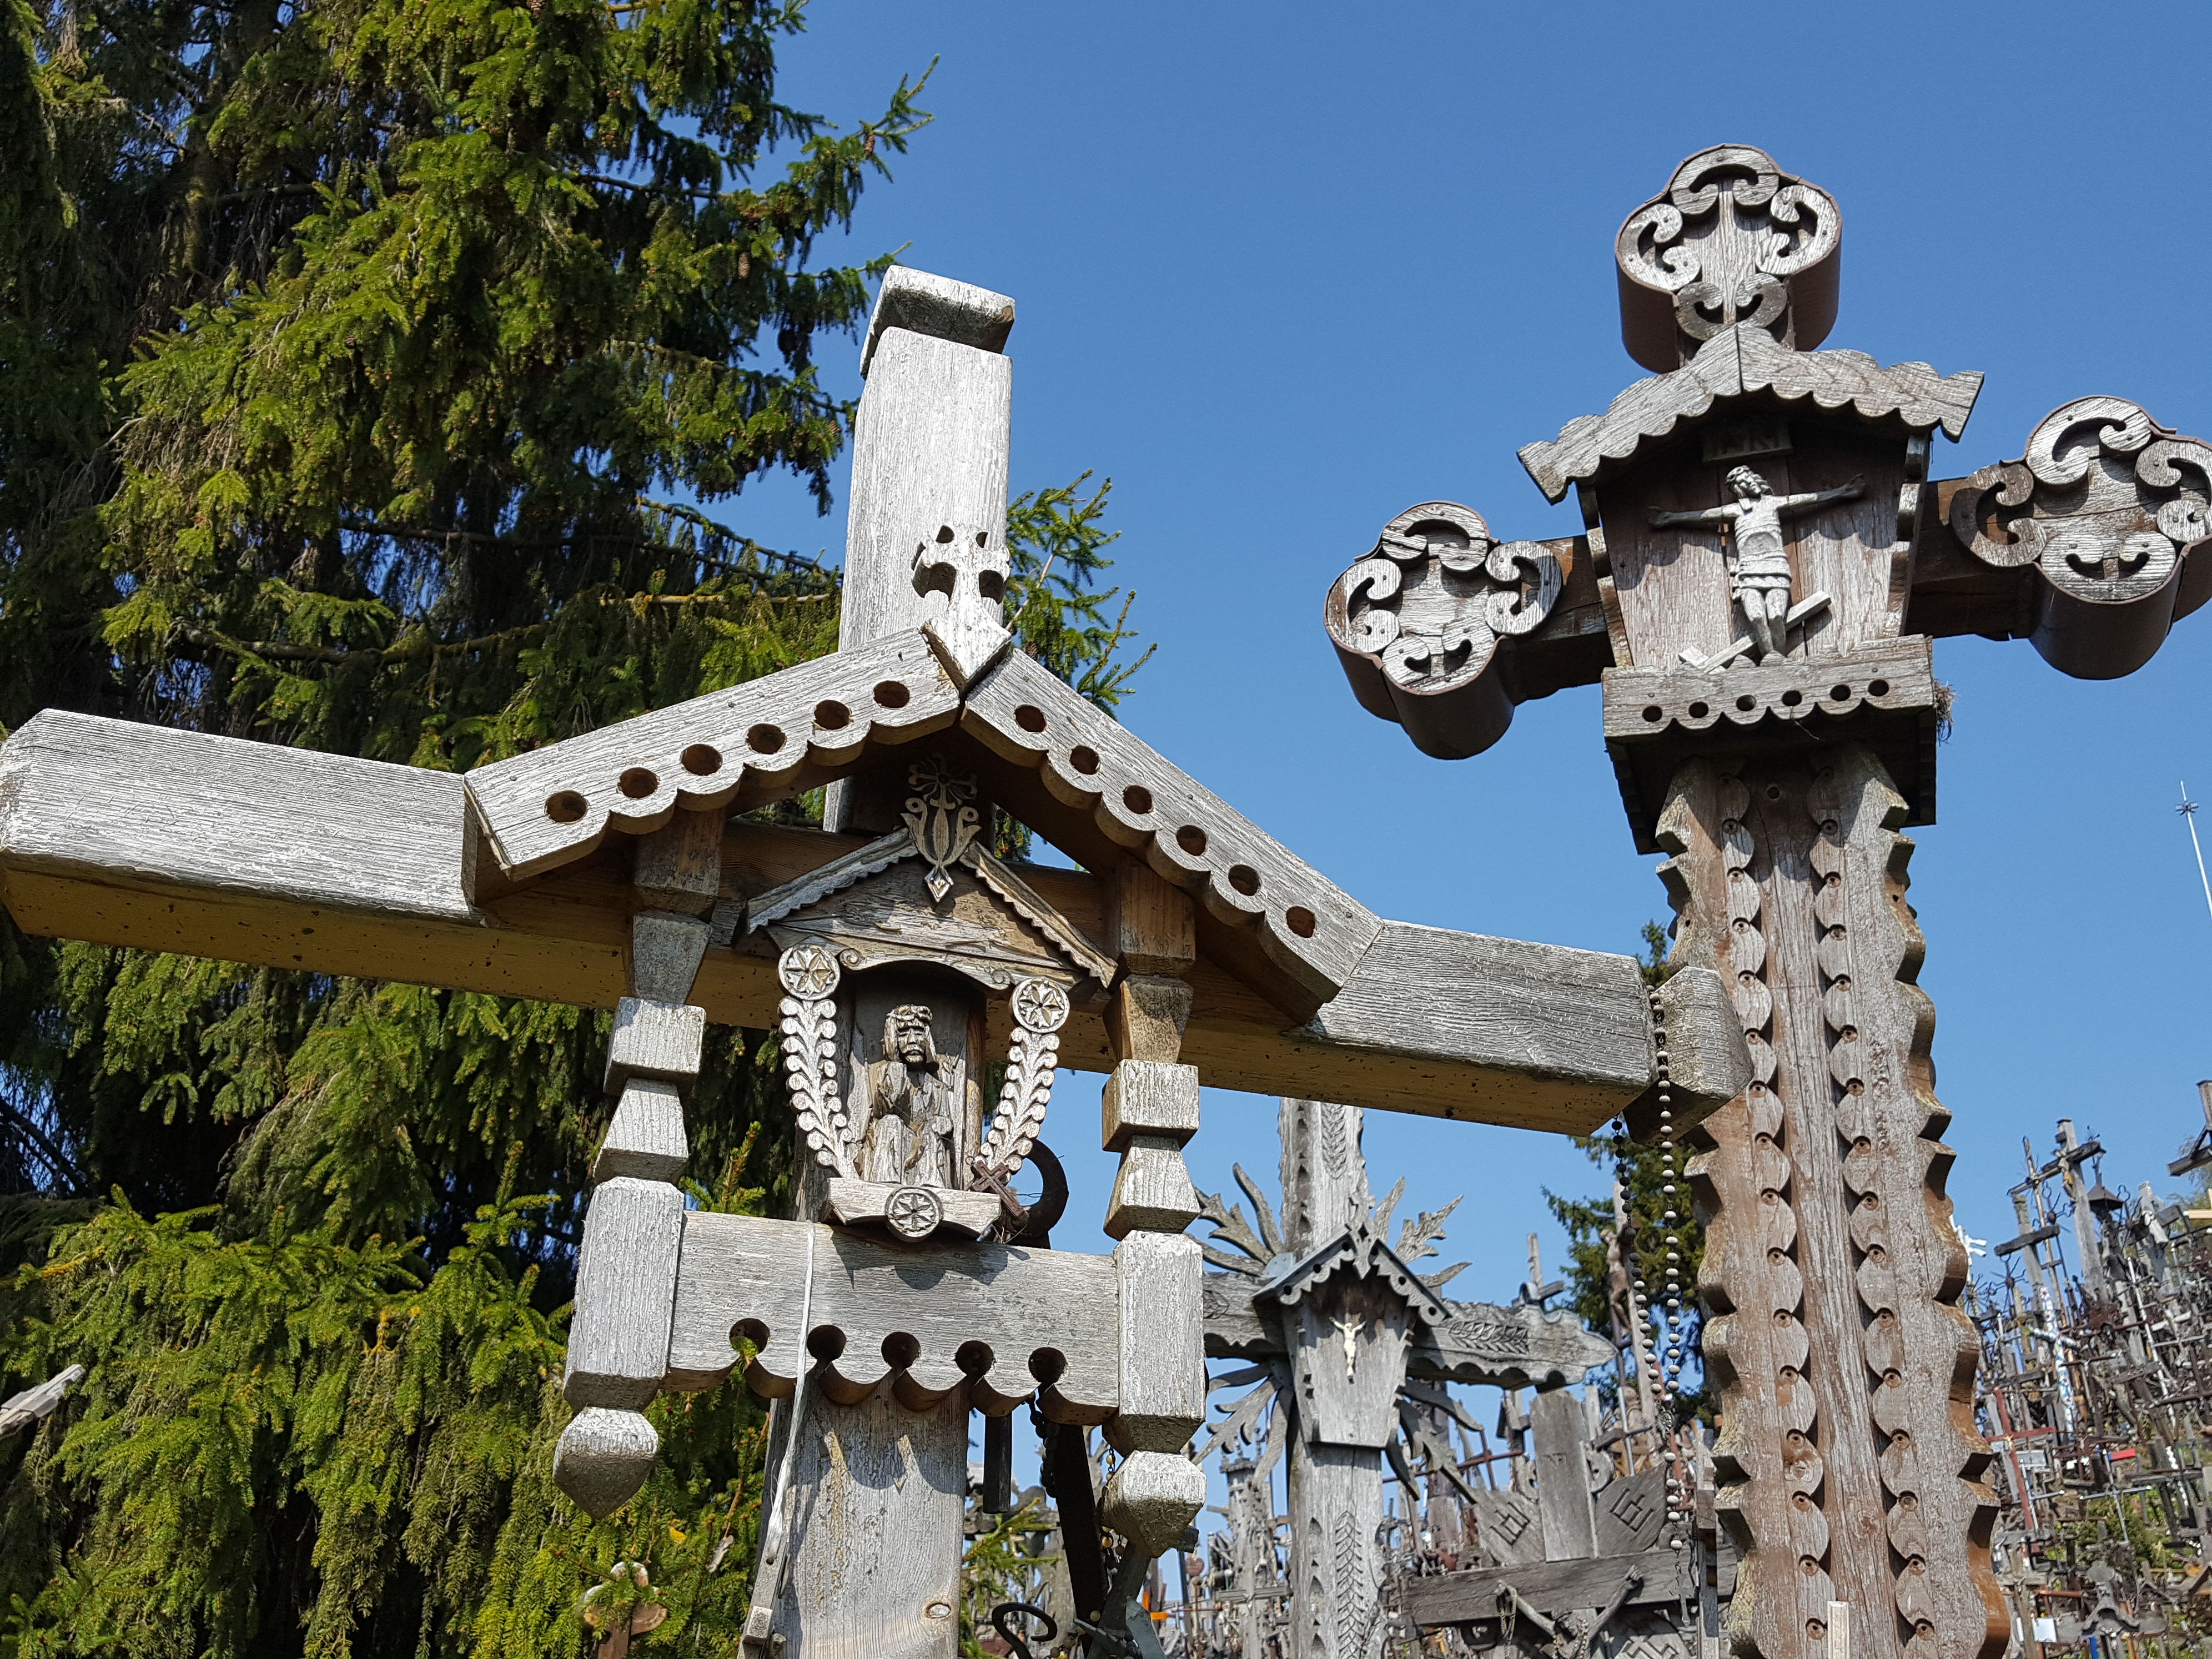 cross crafting tradition in lithuania crosses